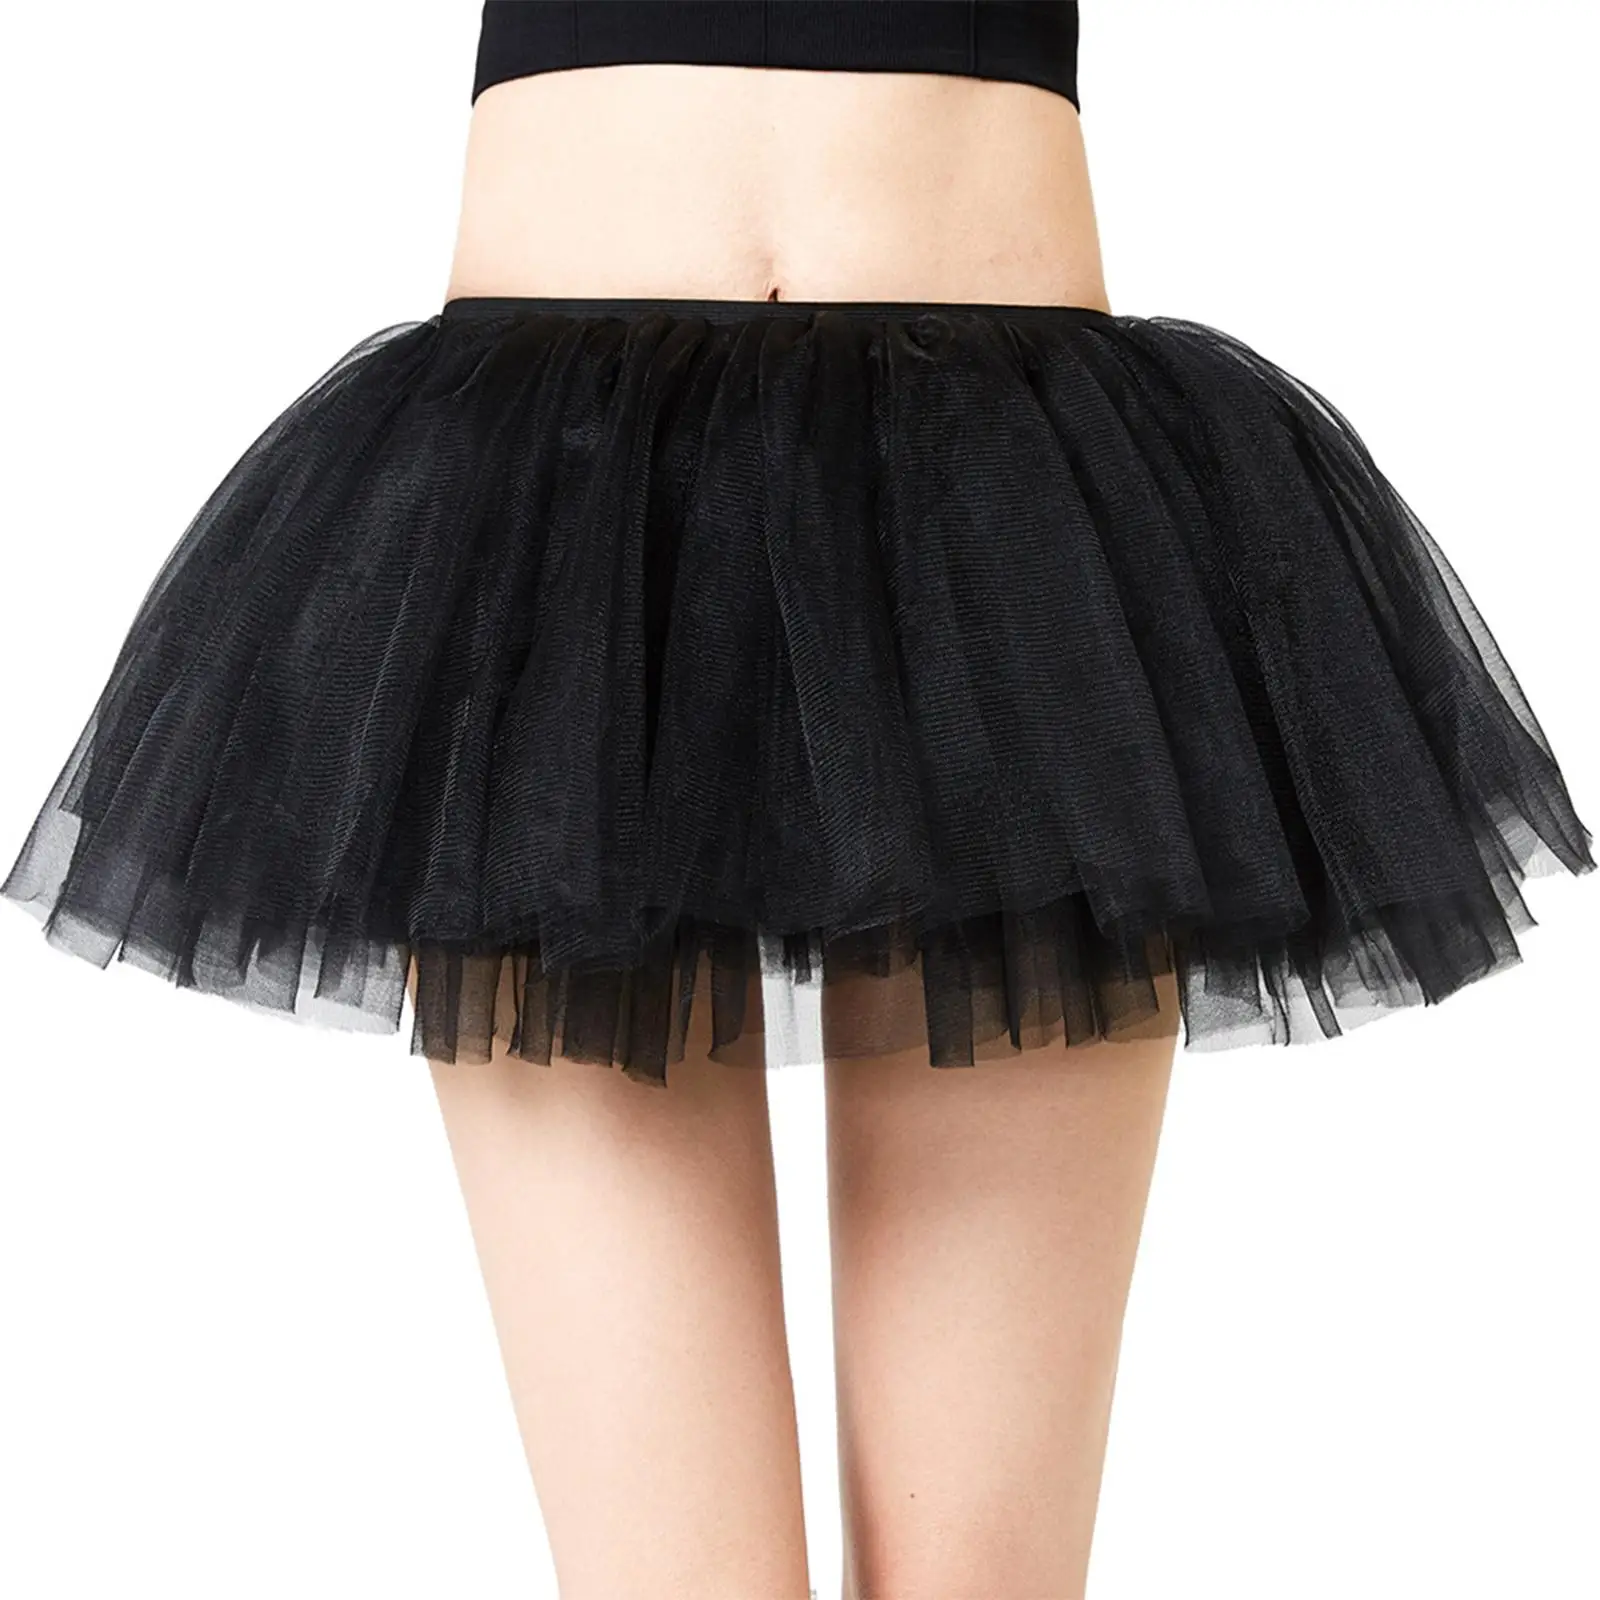 Women Classic Tulle Tutu Skirt Supplies Stage Wedding Costume Beach Party